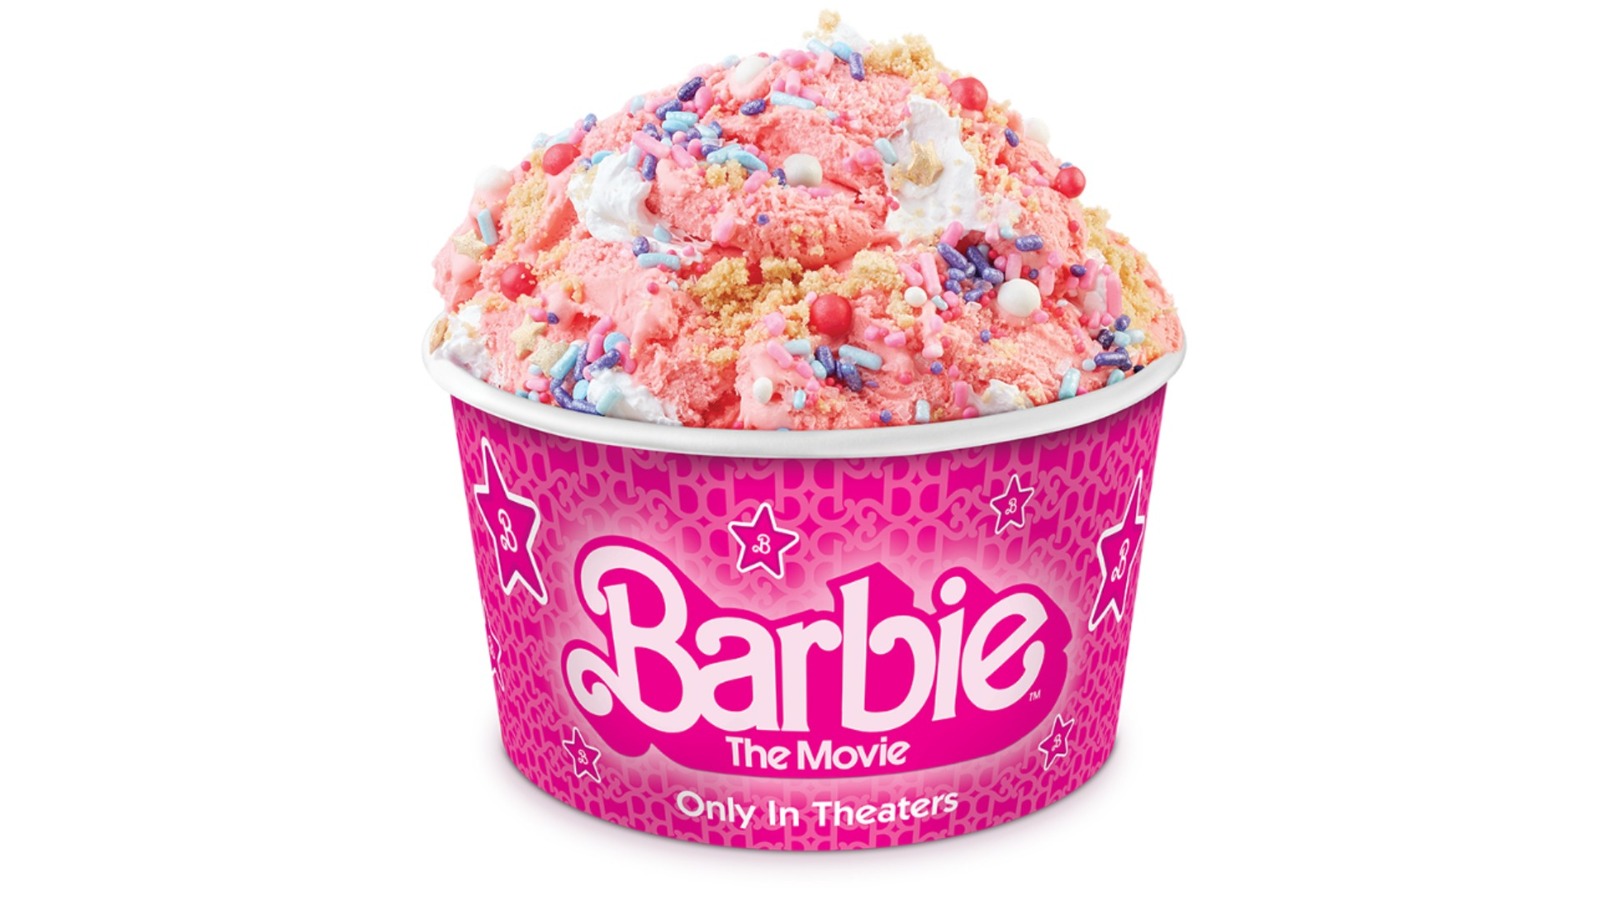 Cold Stone Debuts Cotton Candy Ice Cream In Honor Of The Barbie Movie